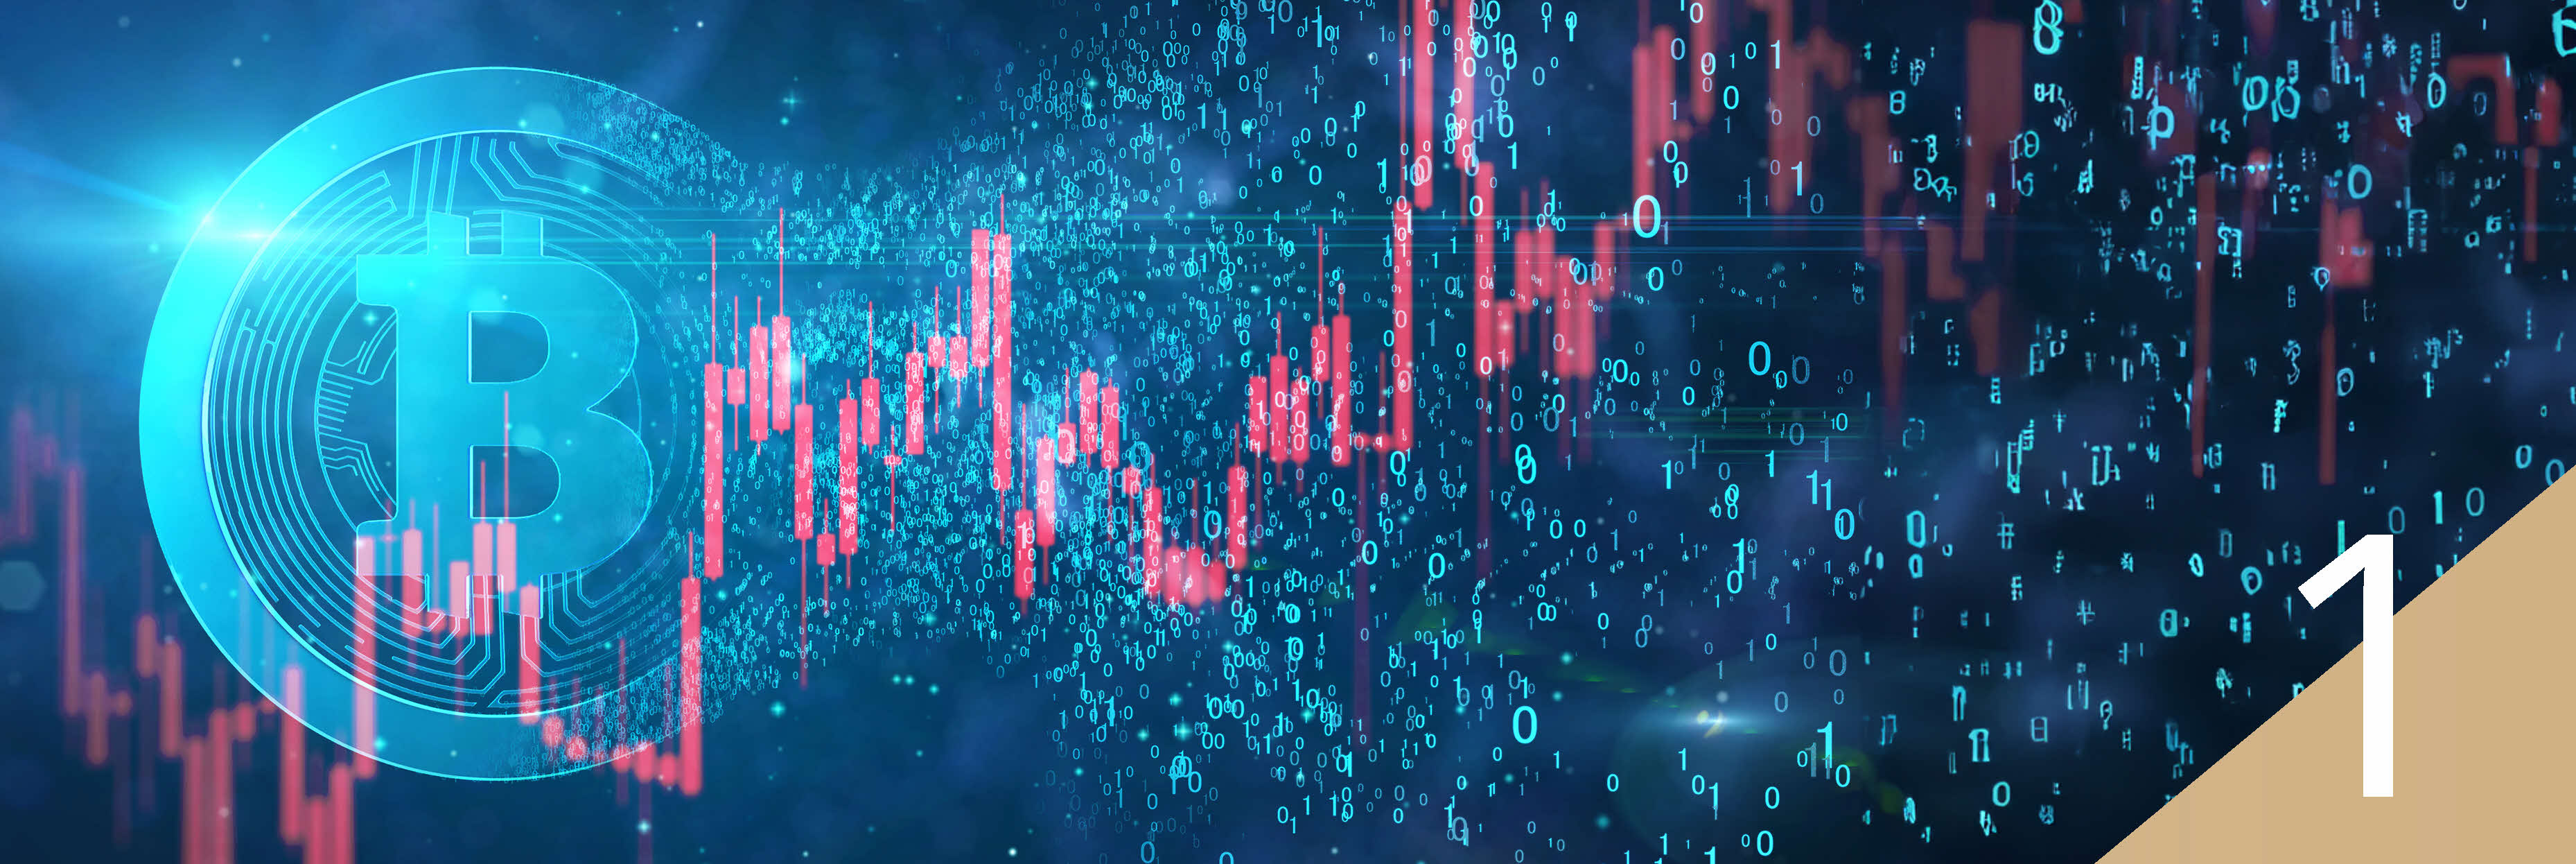 Manage the risks of crypto price volatility by diversifying across multiple investment vehicles, and doing your own research into cryptocurrencies.